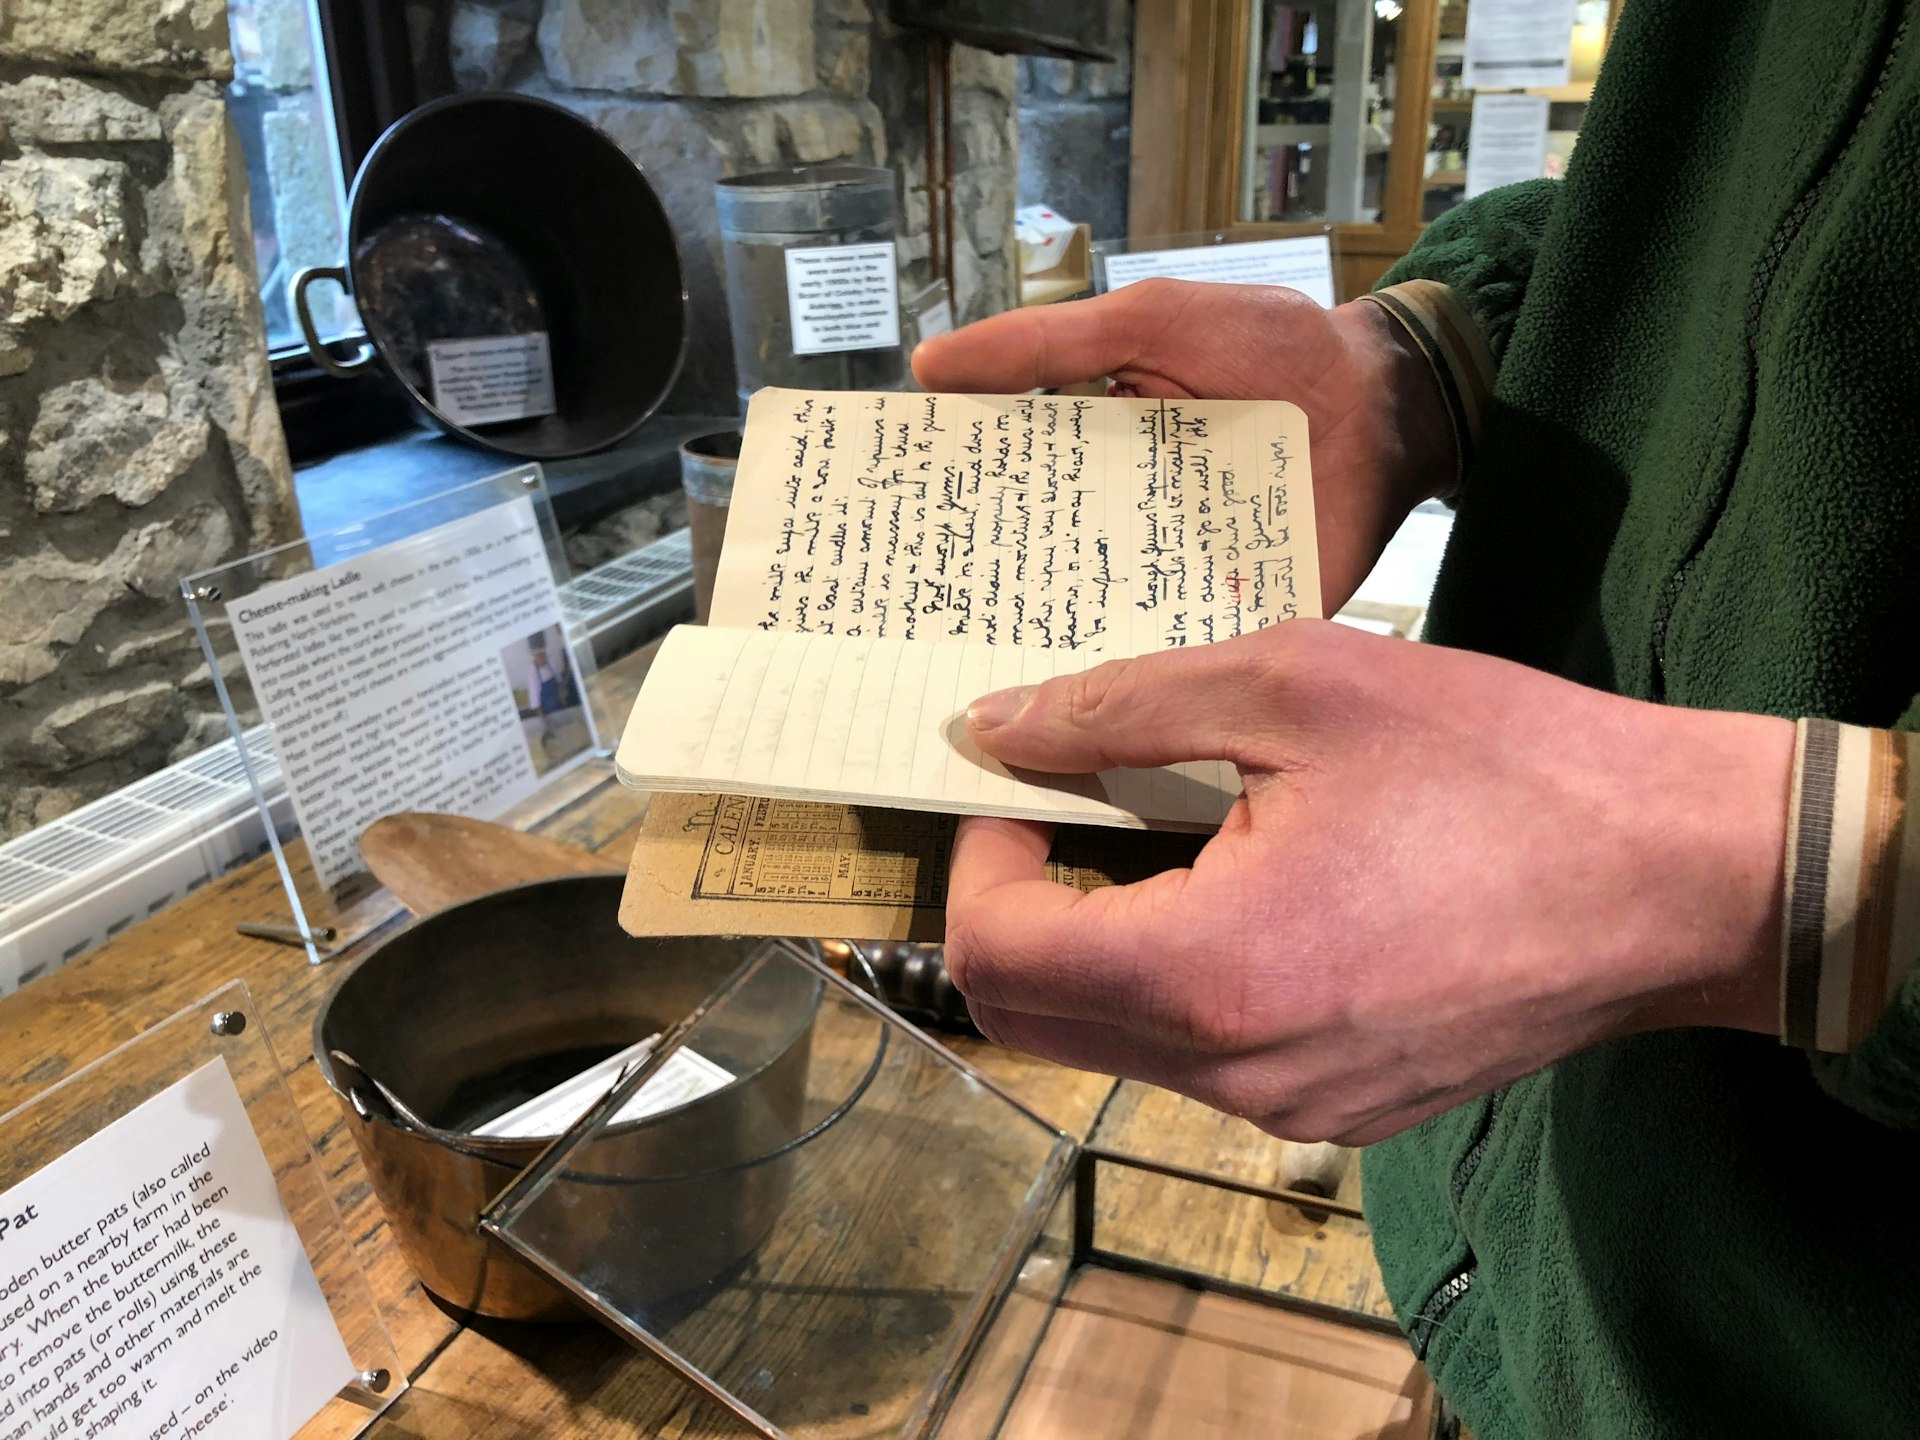 Andy at Courtyard Dairy holds a notebook with his great great grandmother's cheesemaking notes